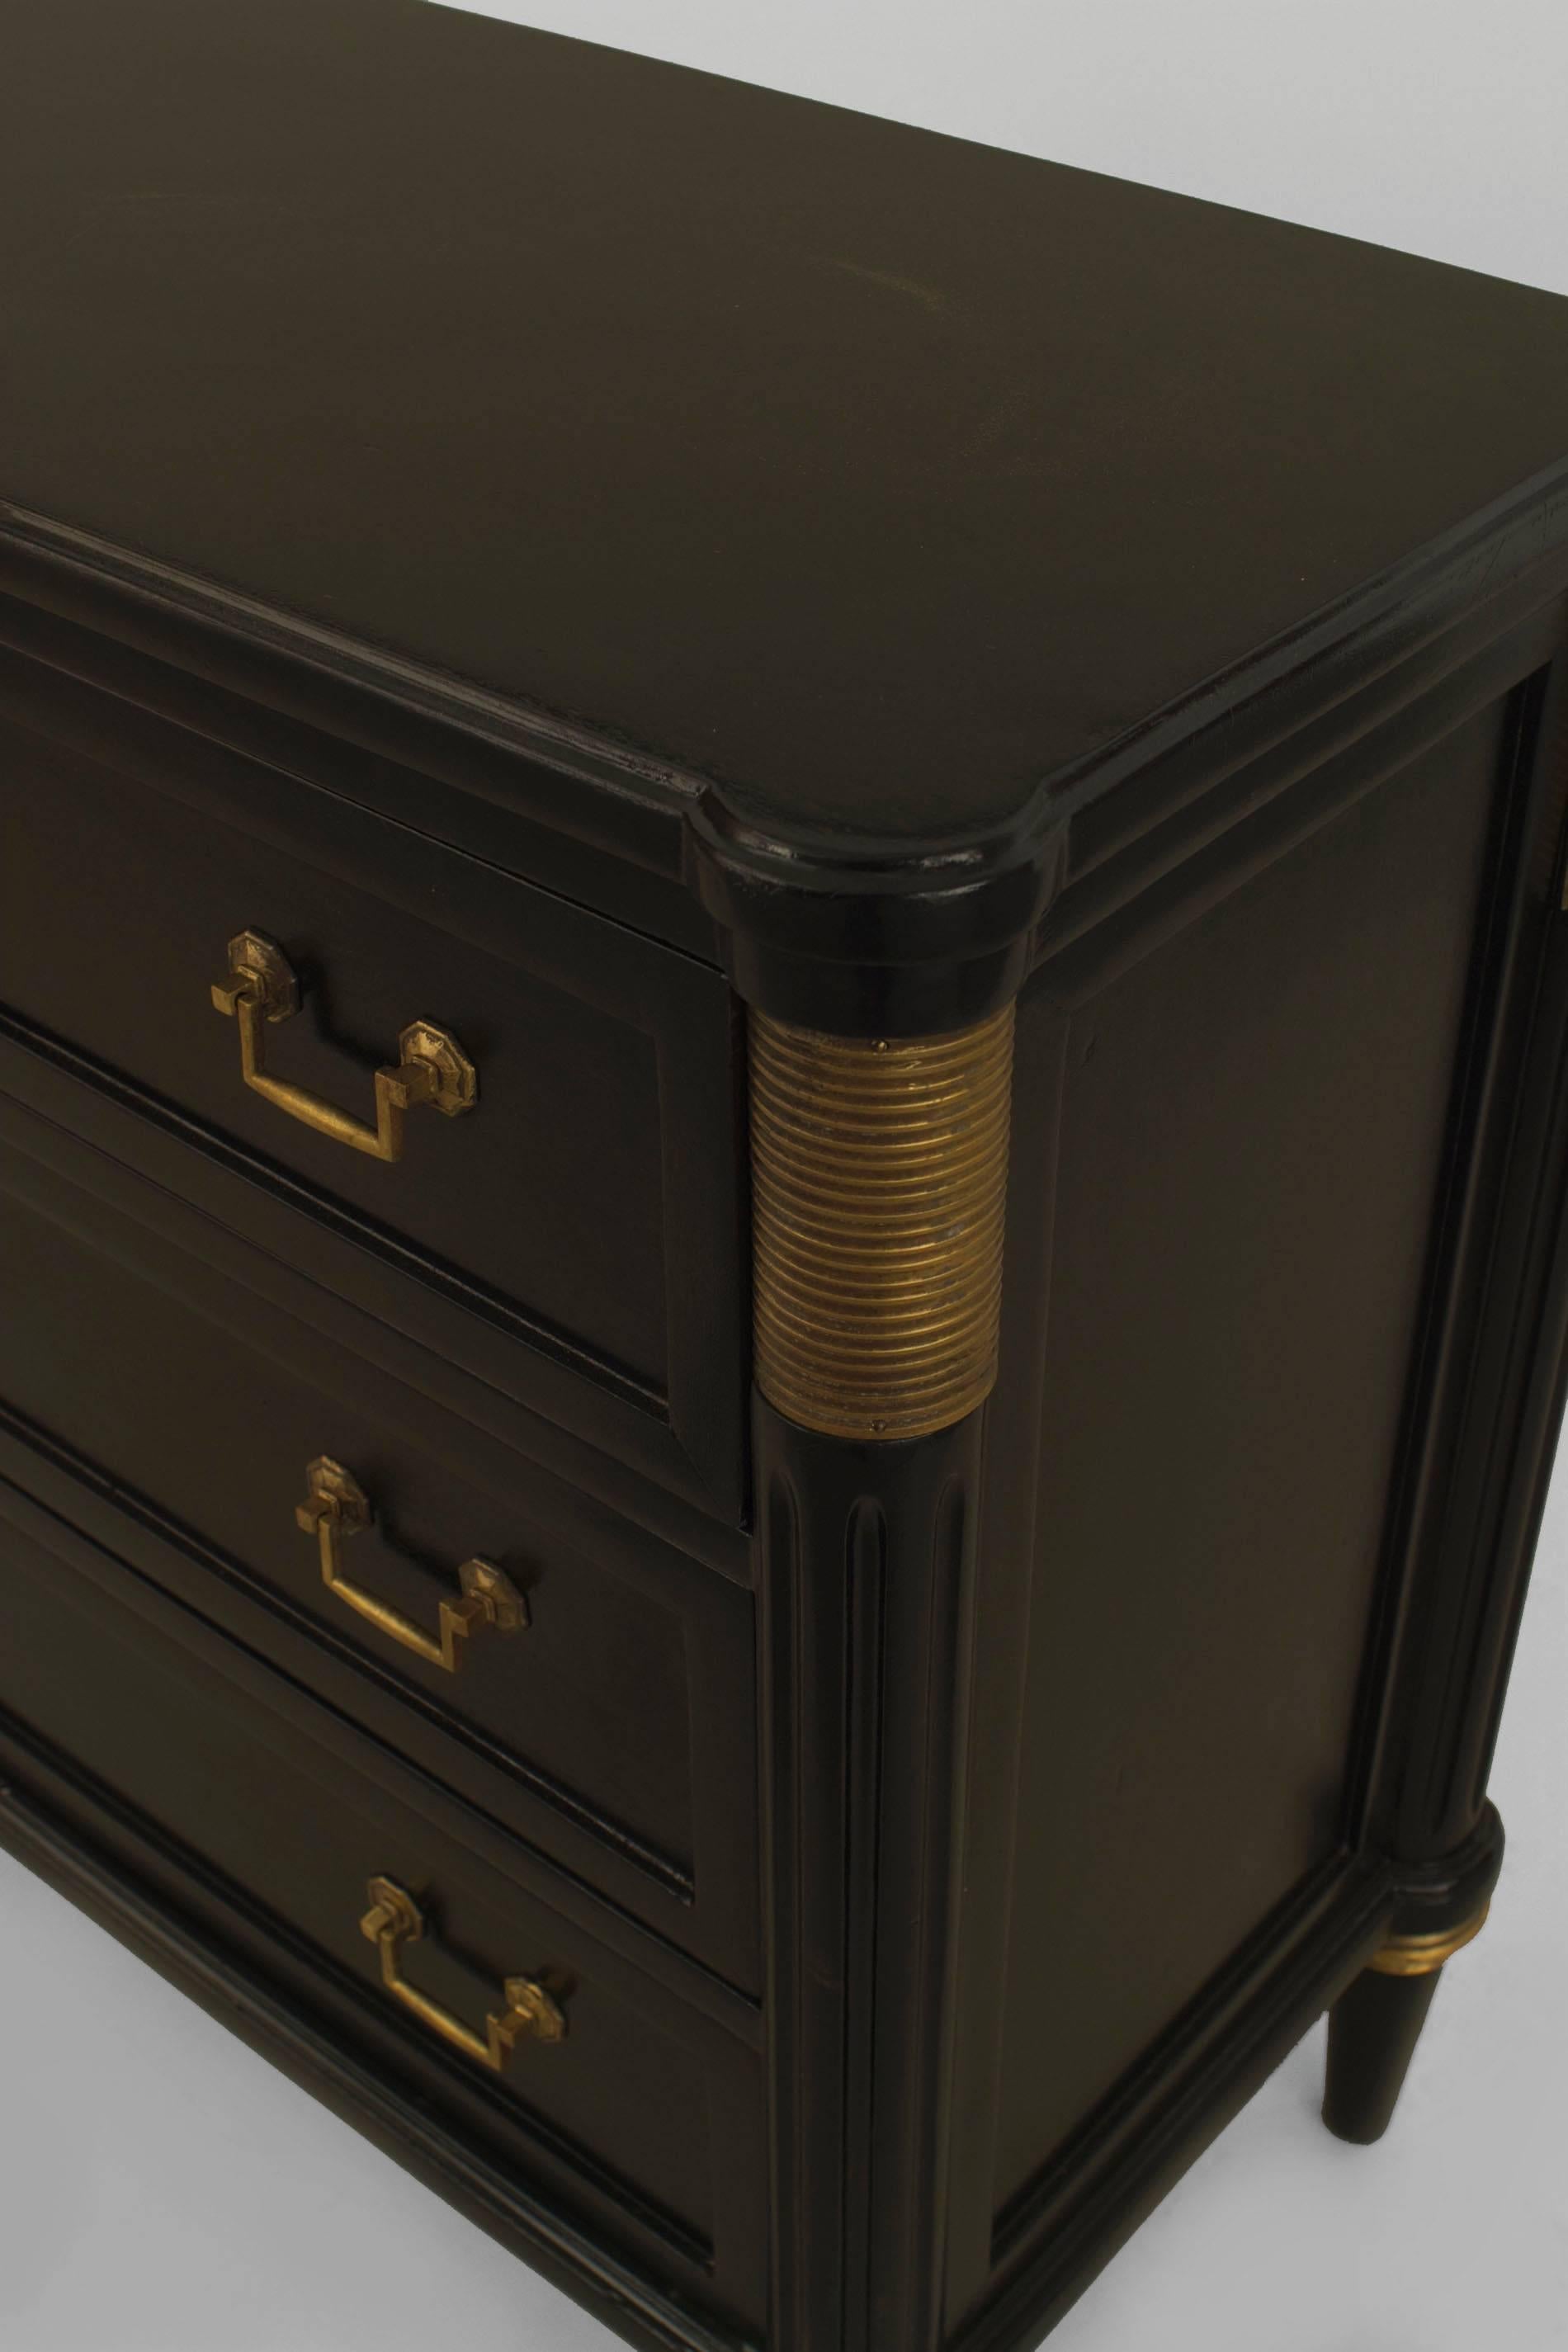 Pair of French 1940s (Louis XVI style) ebonized chests with bronze trim on
sides and legs with 3 drawers having a pair of handles on tapered round legs (att: JANSEN).